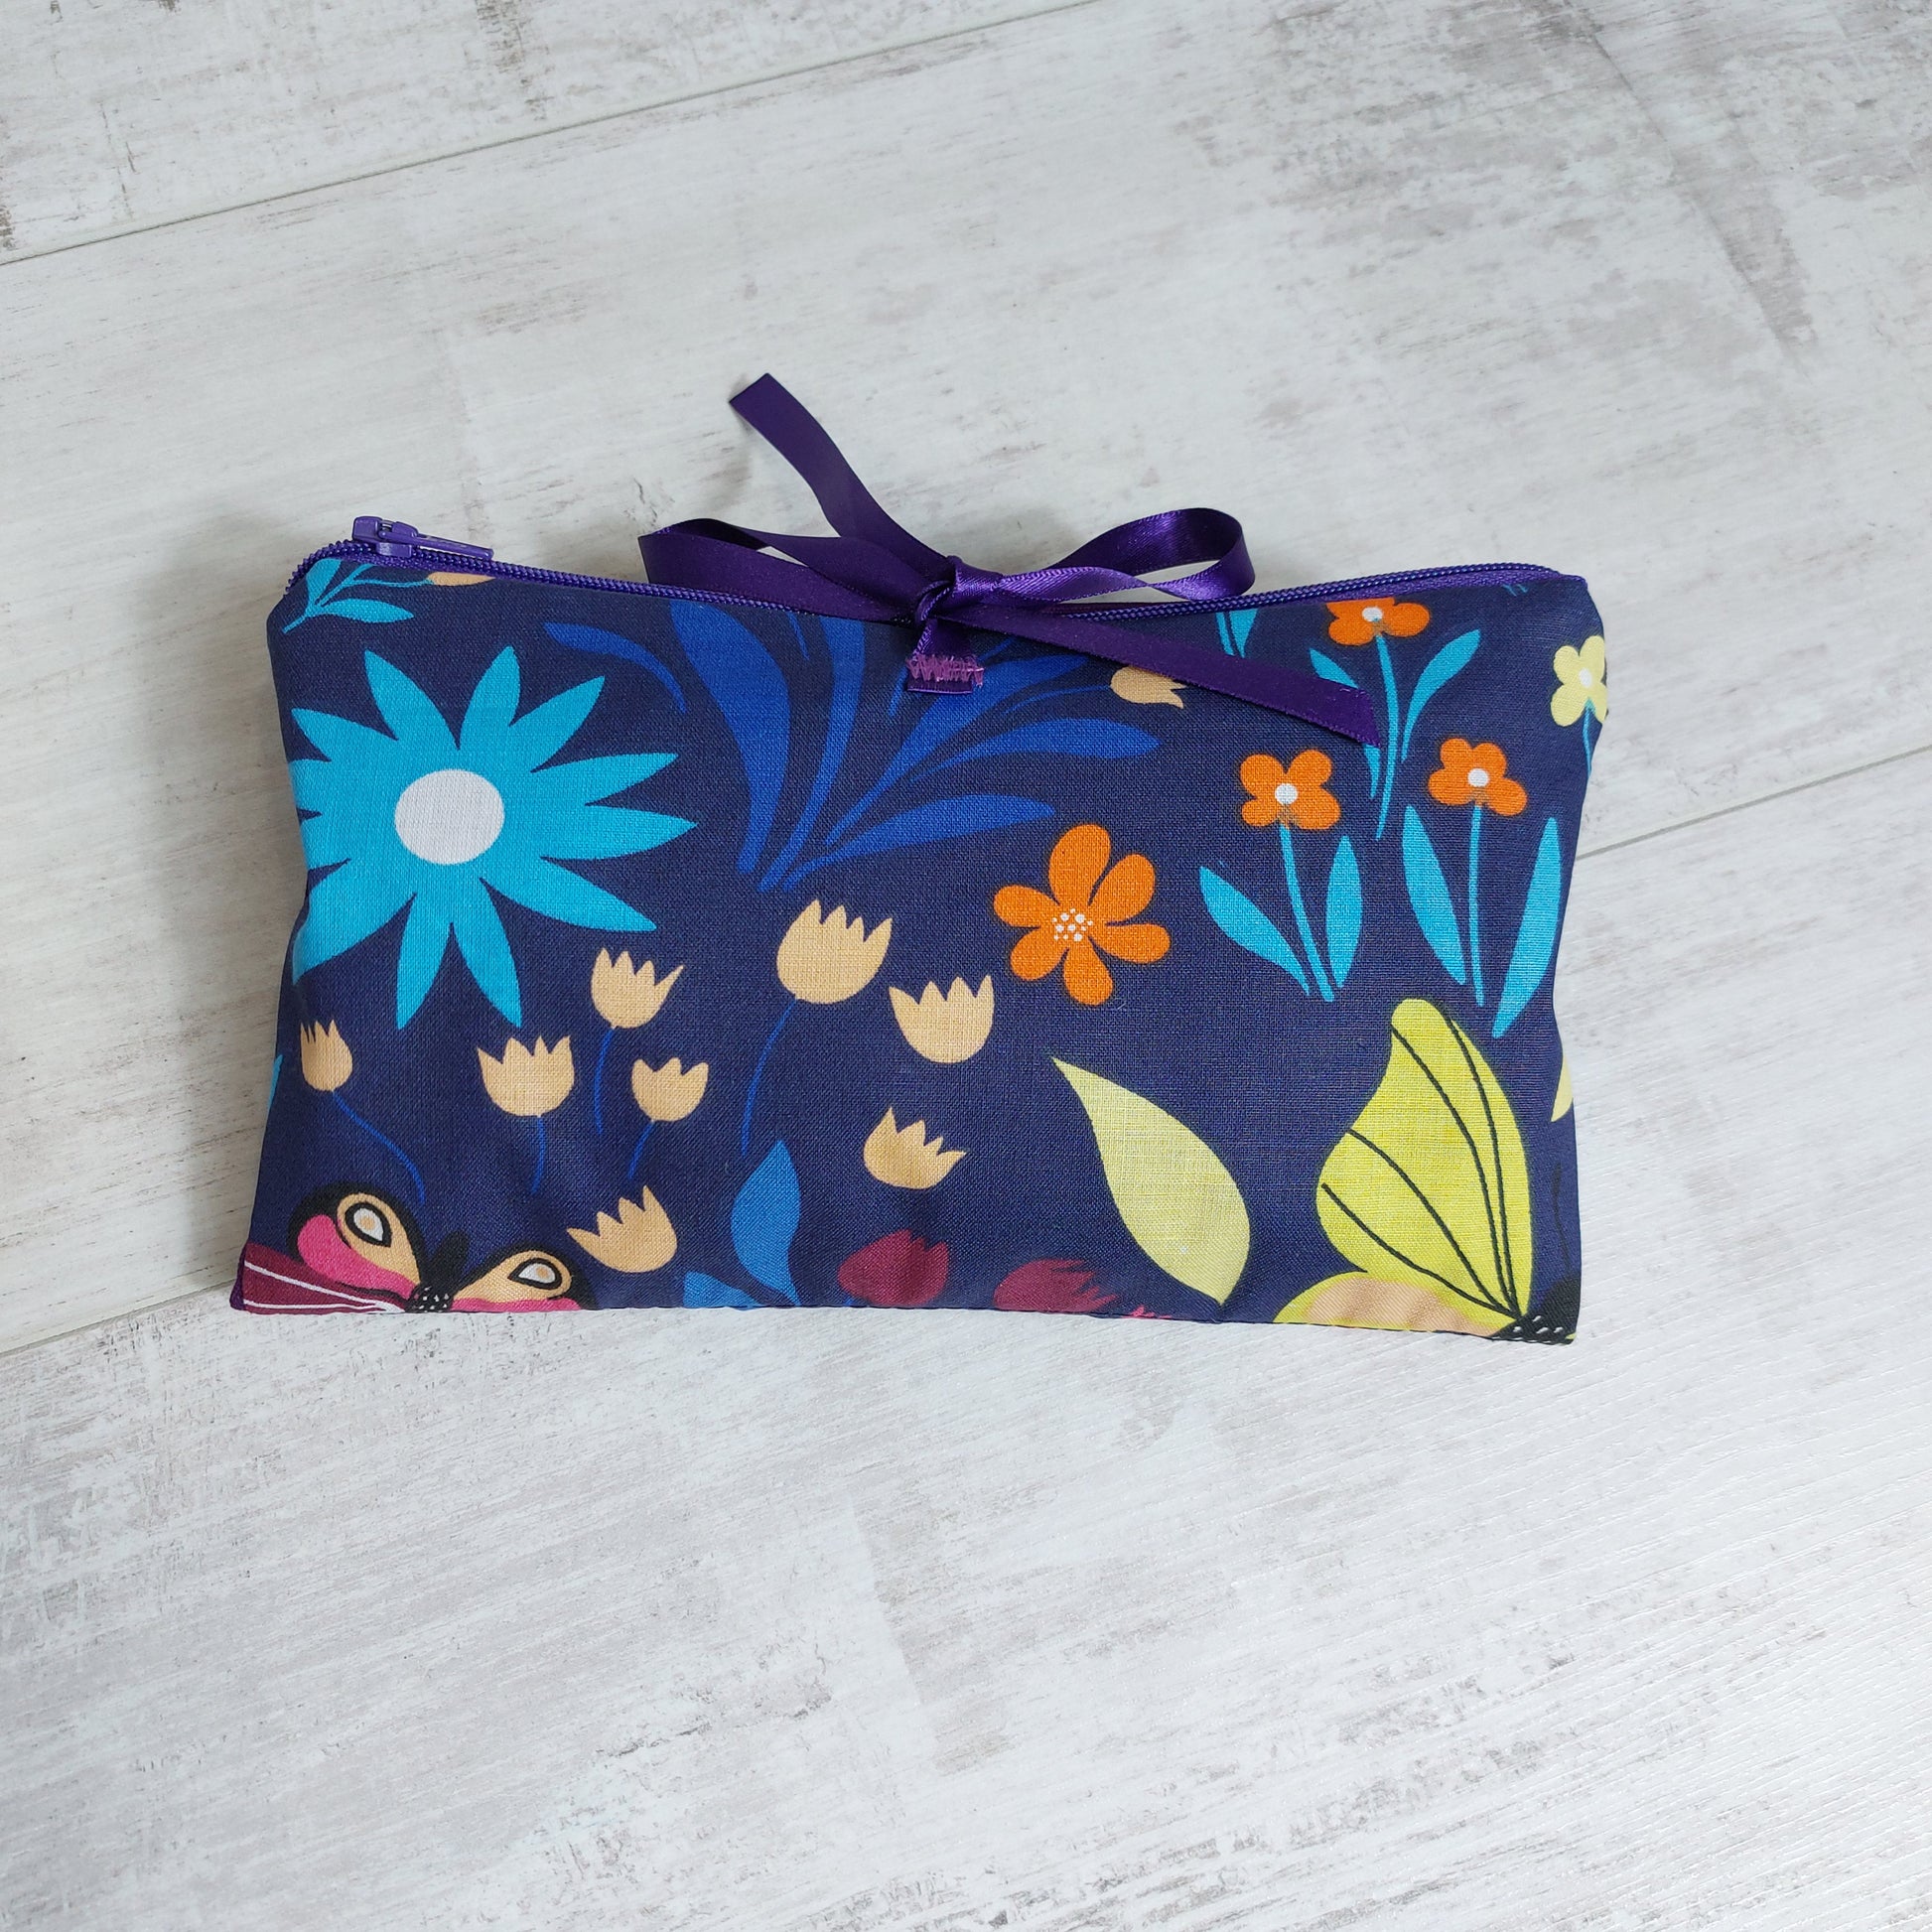 Floral make up bag with ribbon ties. Navy with bright colour pops and purple.